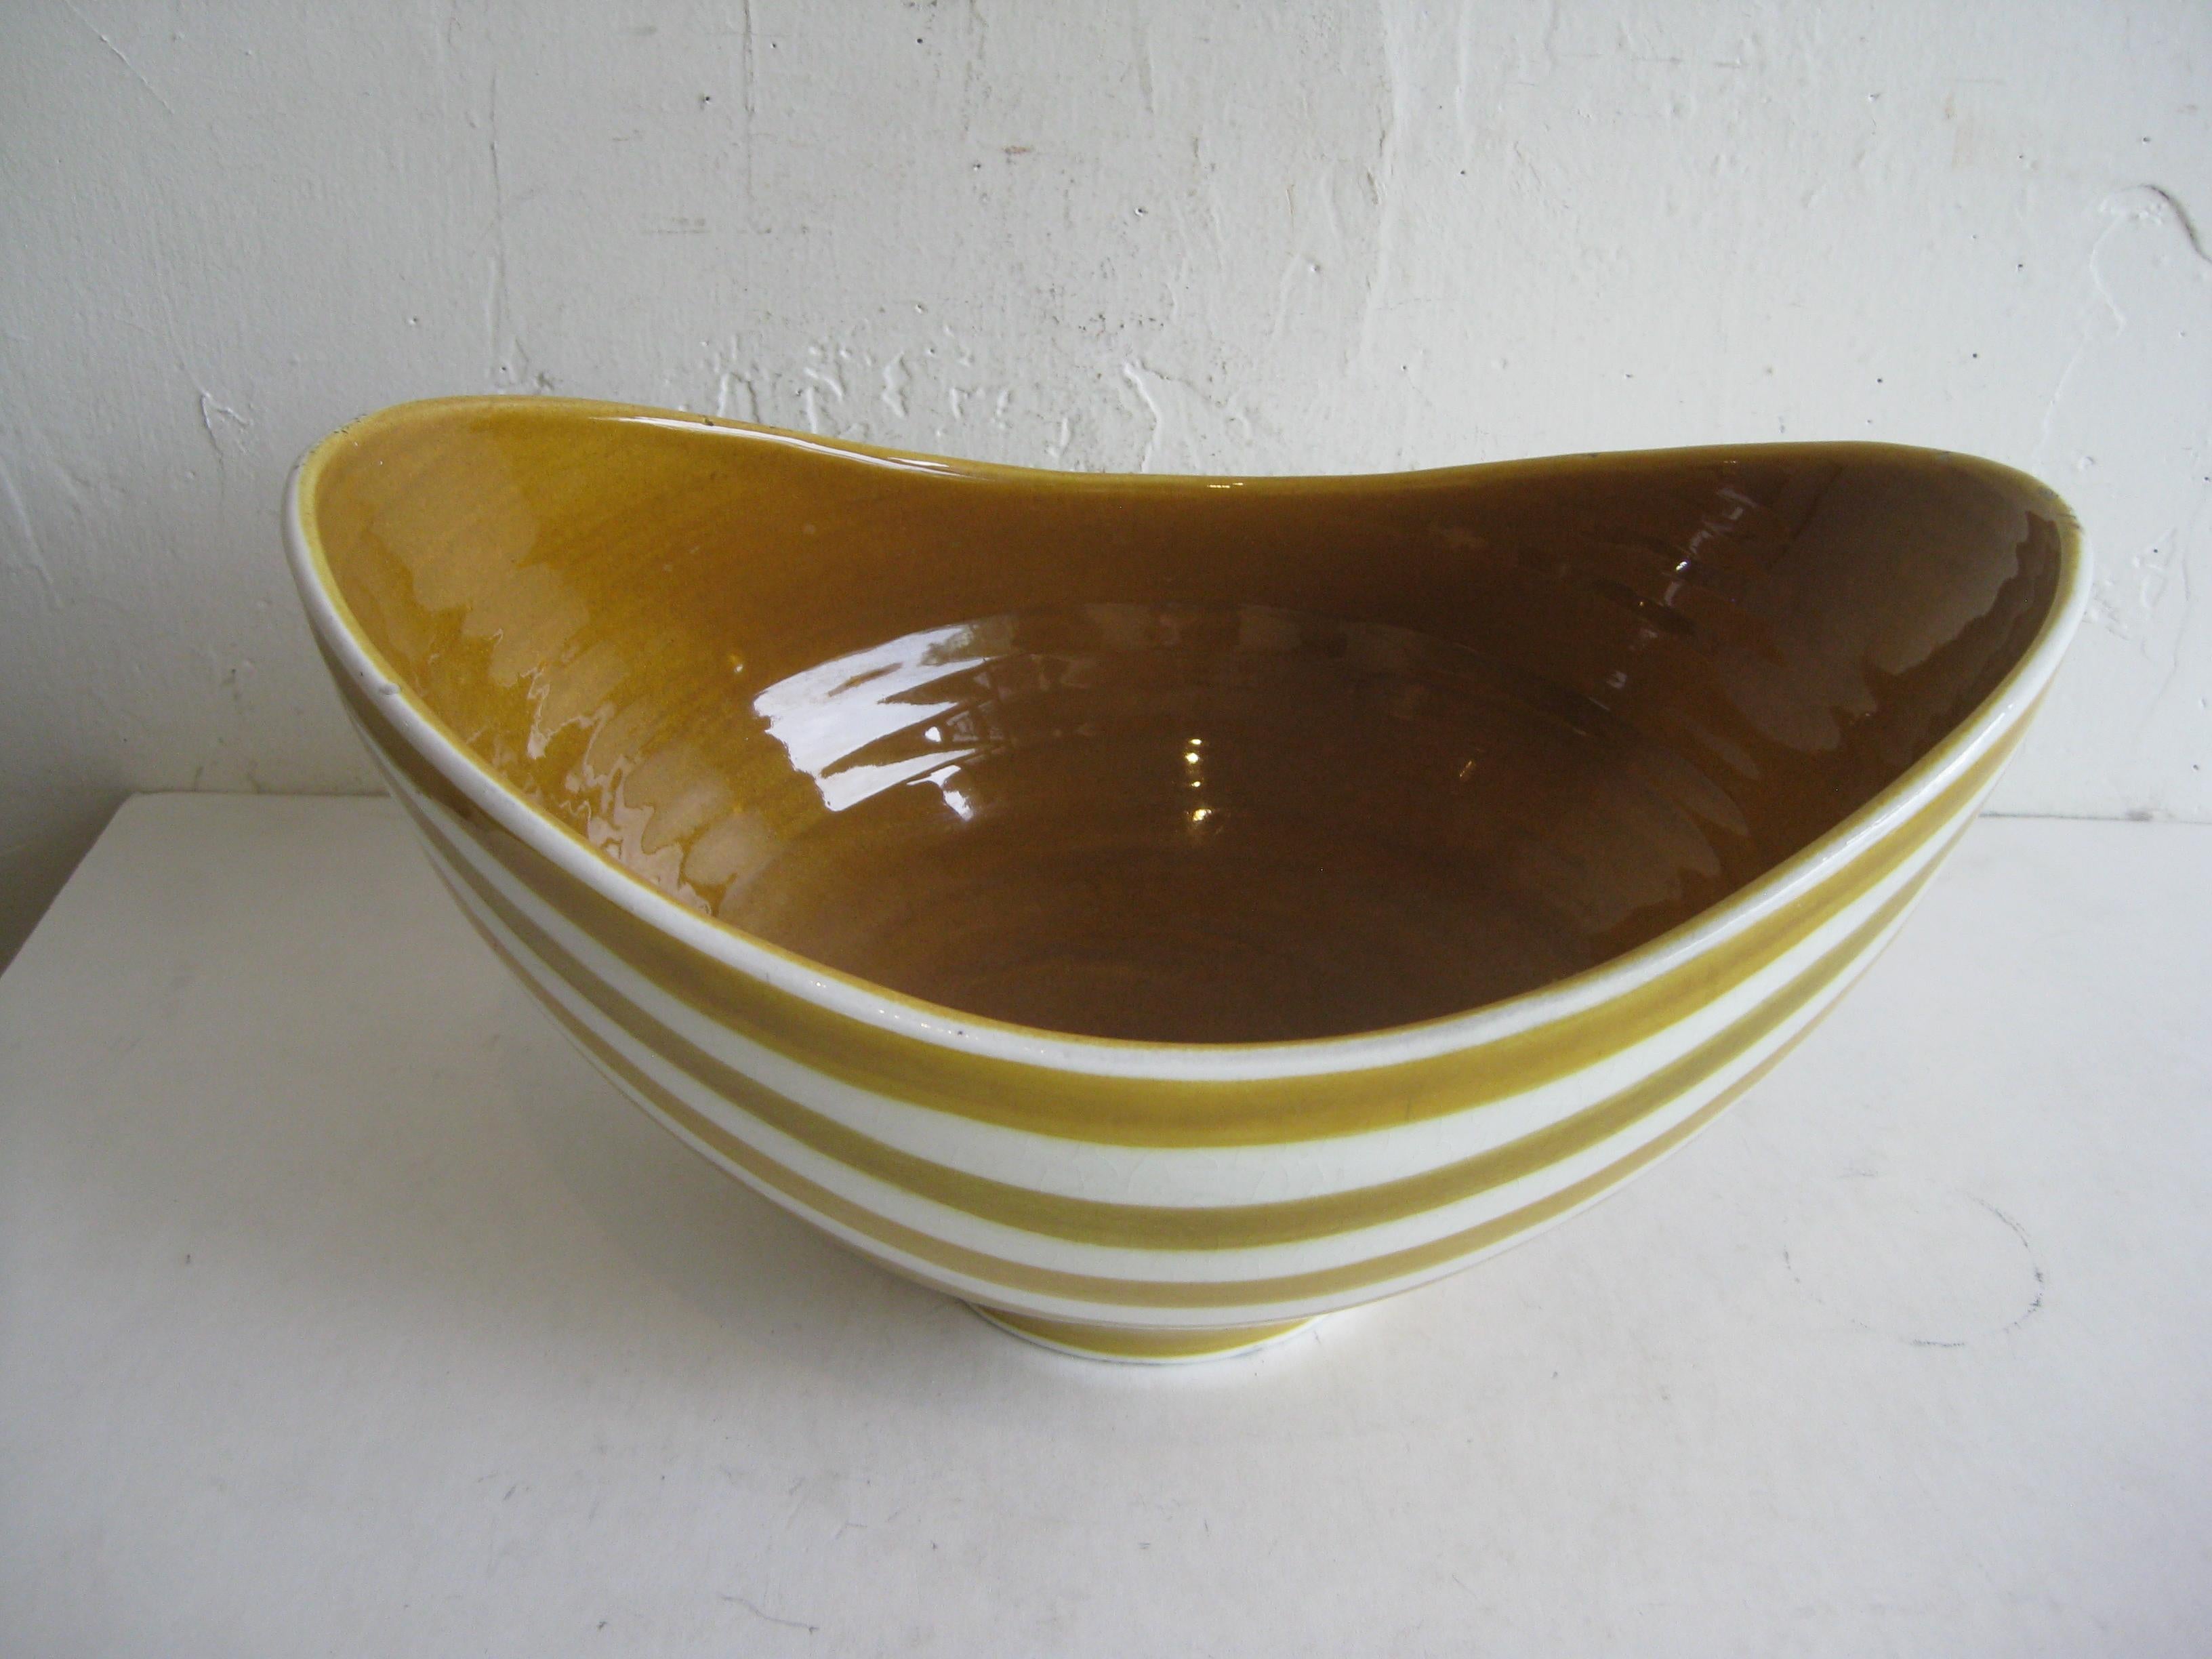 Fantastic large abstract modernist Swiss pottery/ceramic bowl by A-H KAG, circa 1960s. Great color and form. Signed on the bottom and was made in Switzerland. In very nice original condition. Has a couple very small flea-bites to the original glaze,